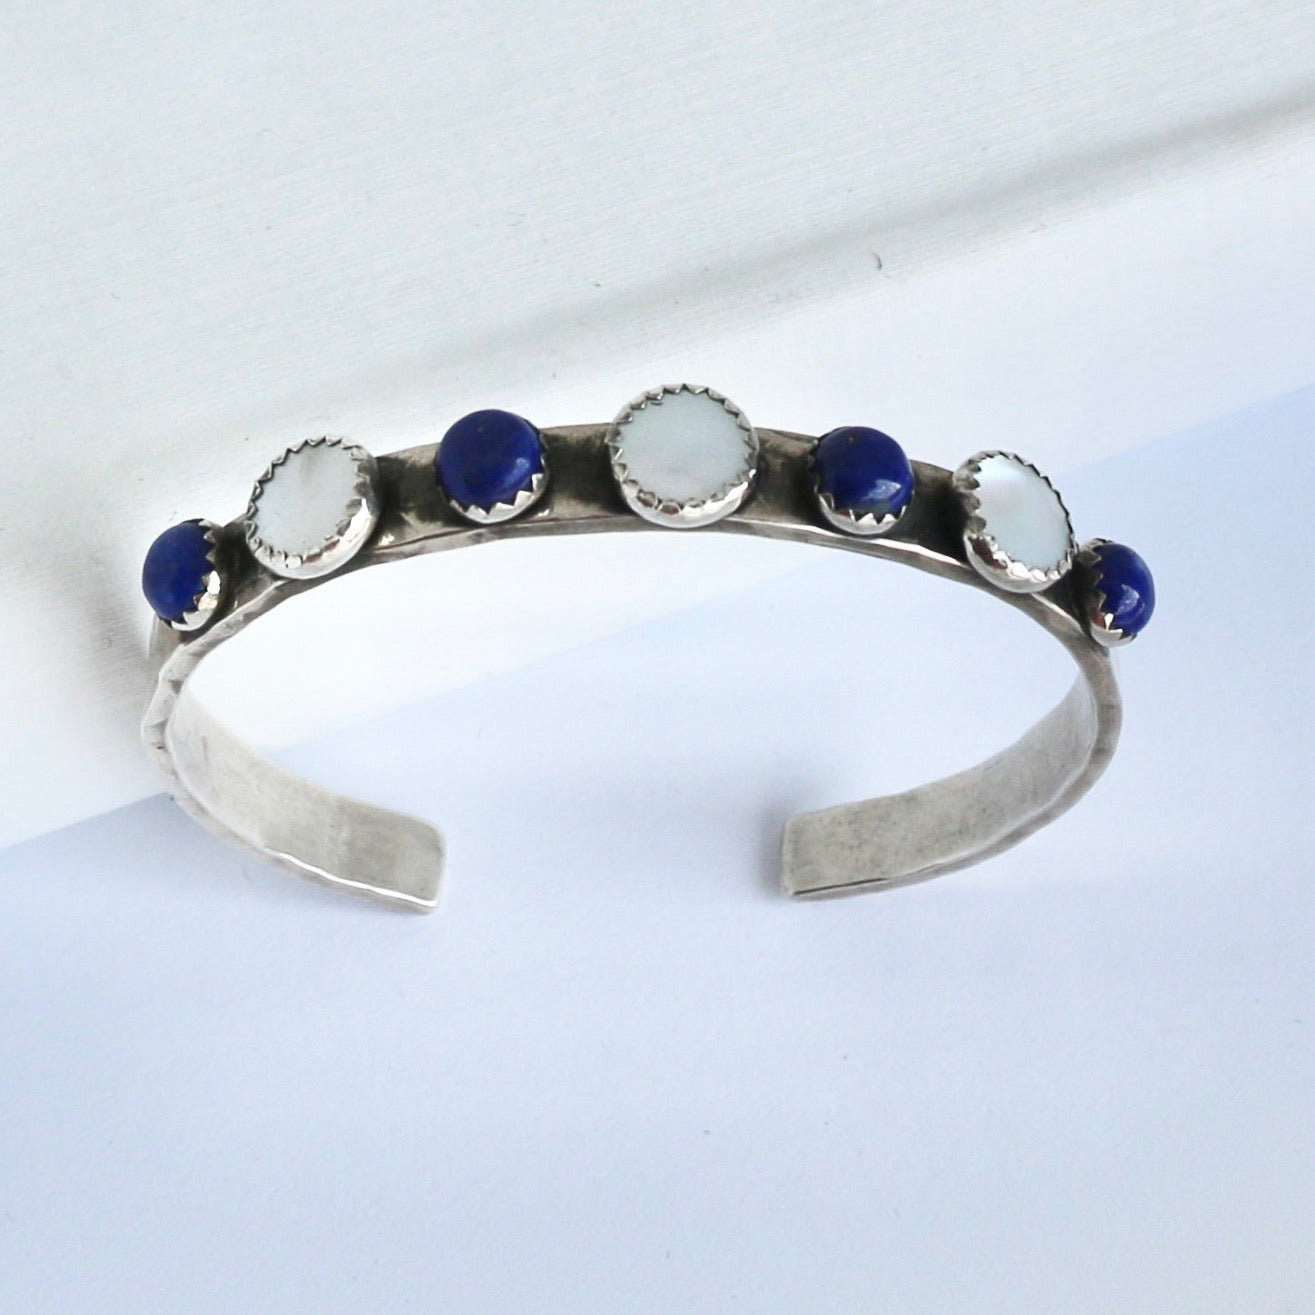 6mm Mother of Pearl and Lapis Cuff Cuffs Richard Schmidt   